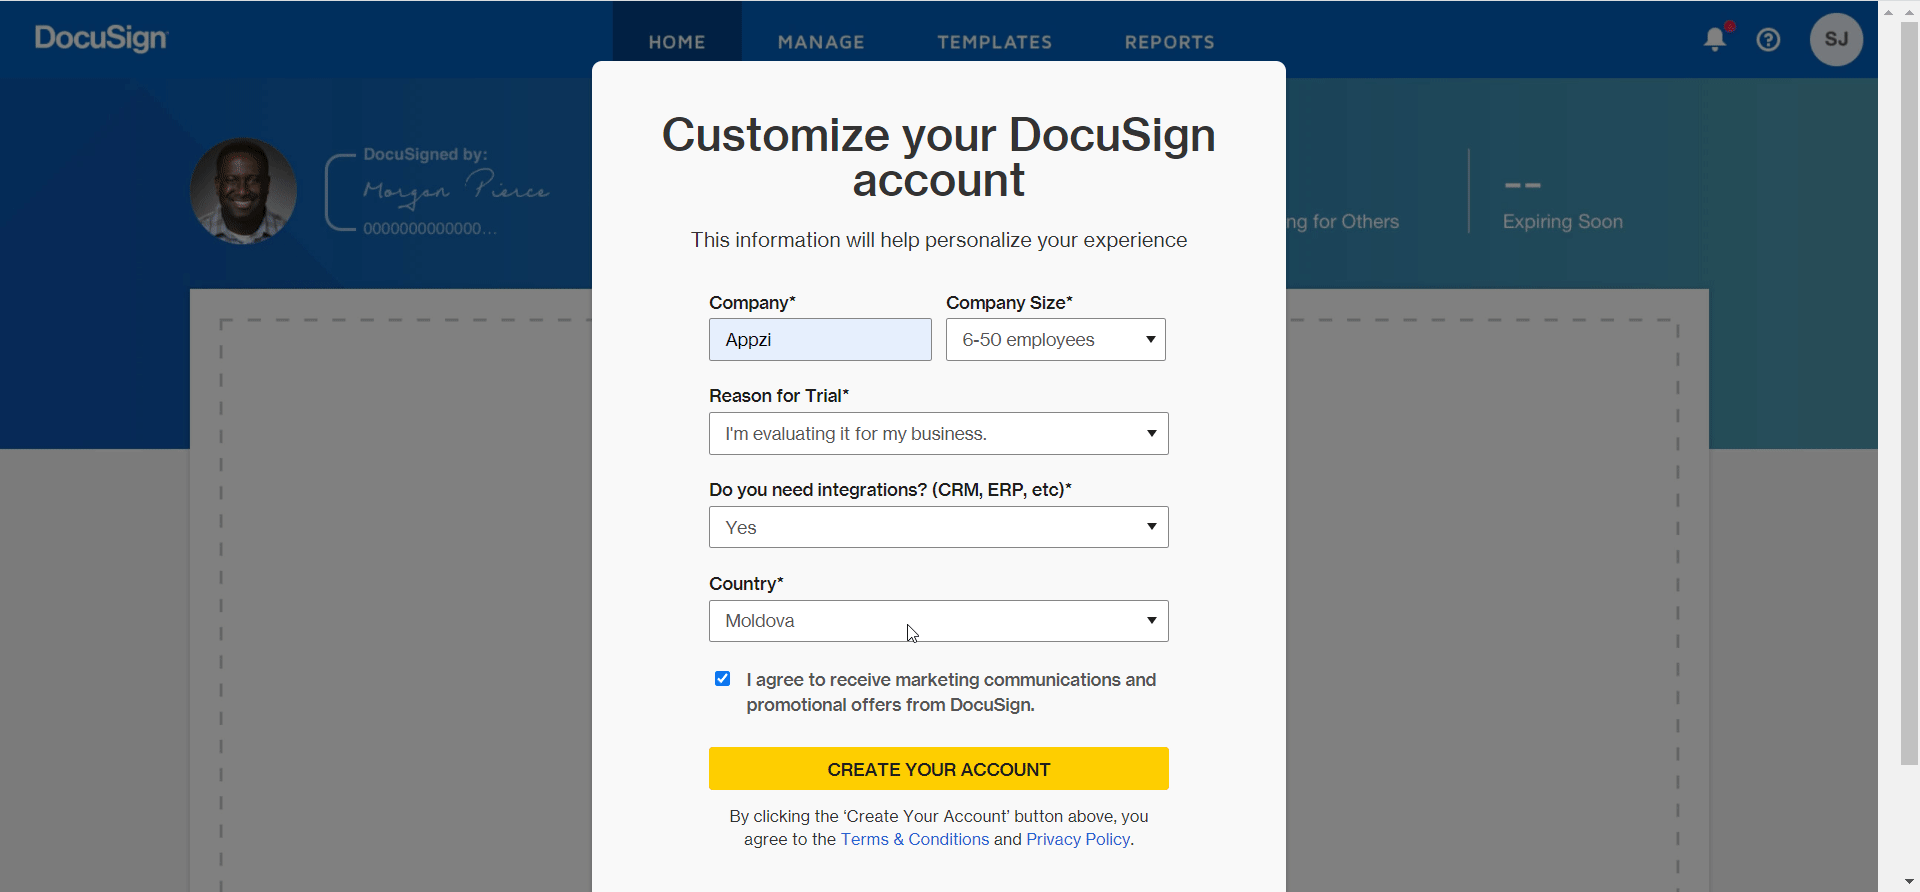 DocuSign onboarding survey questions